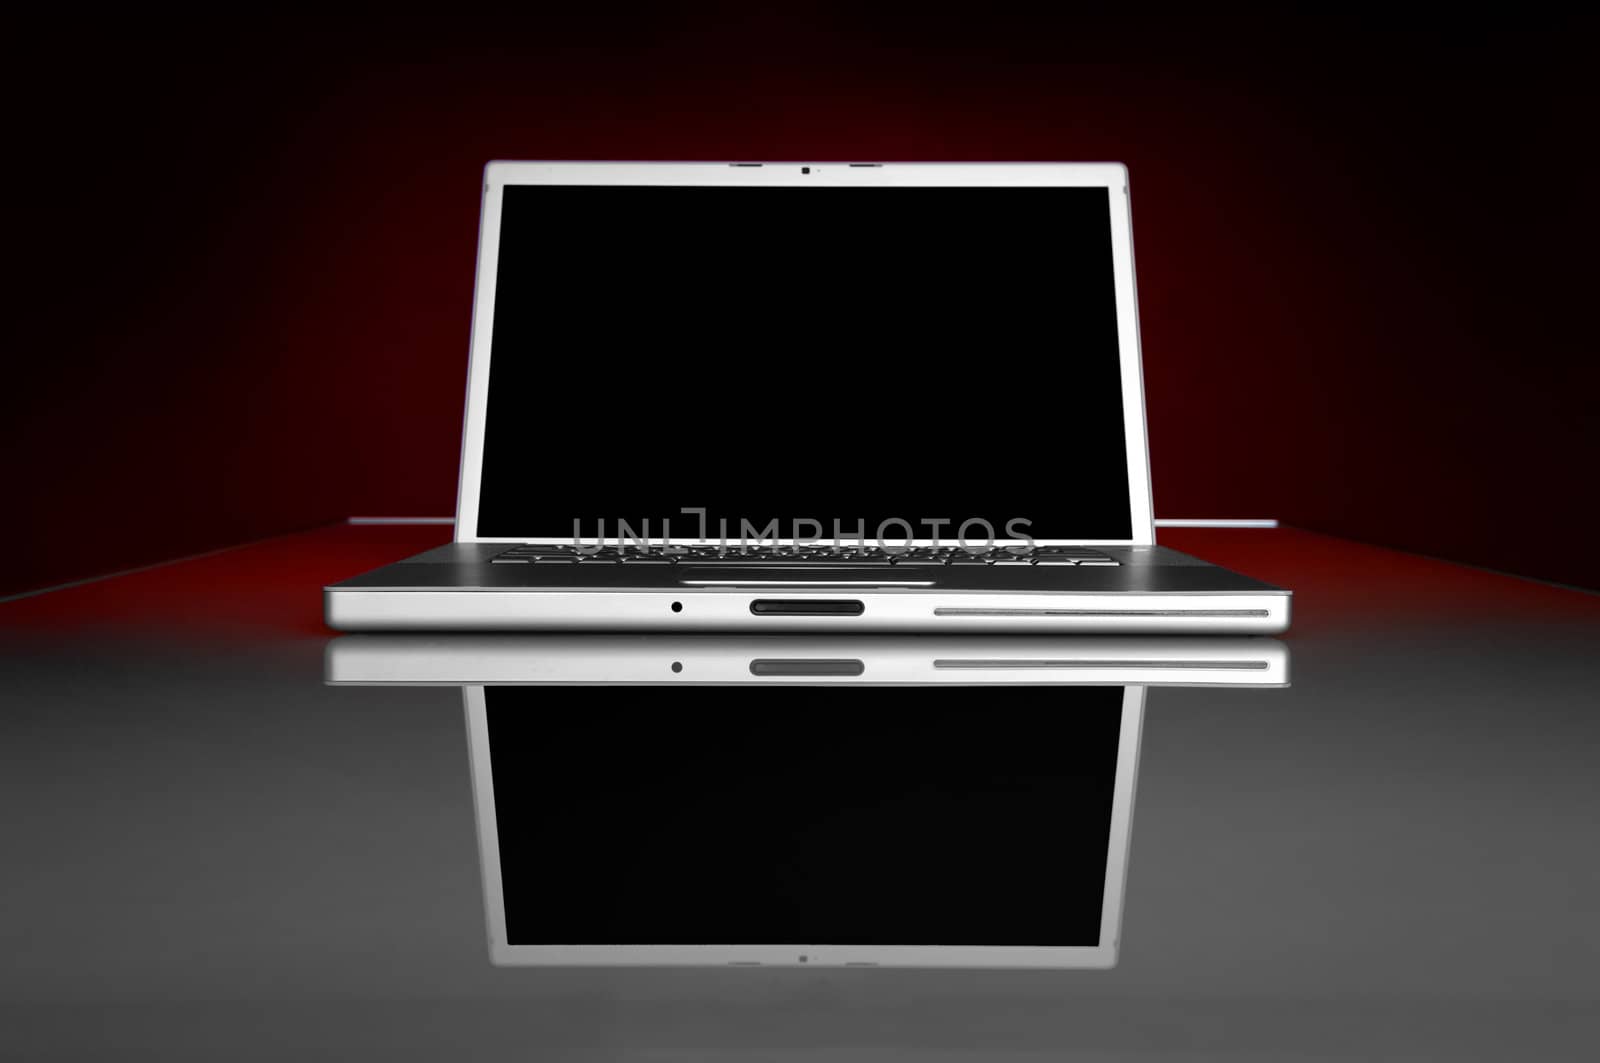 Image of a dark screen laptop on a glass table with reflection